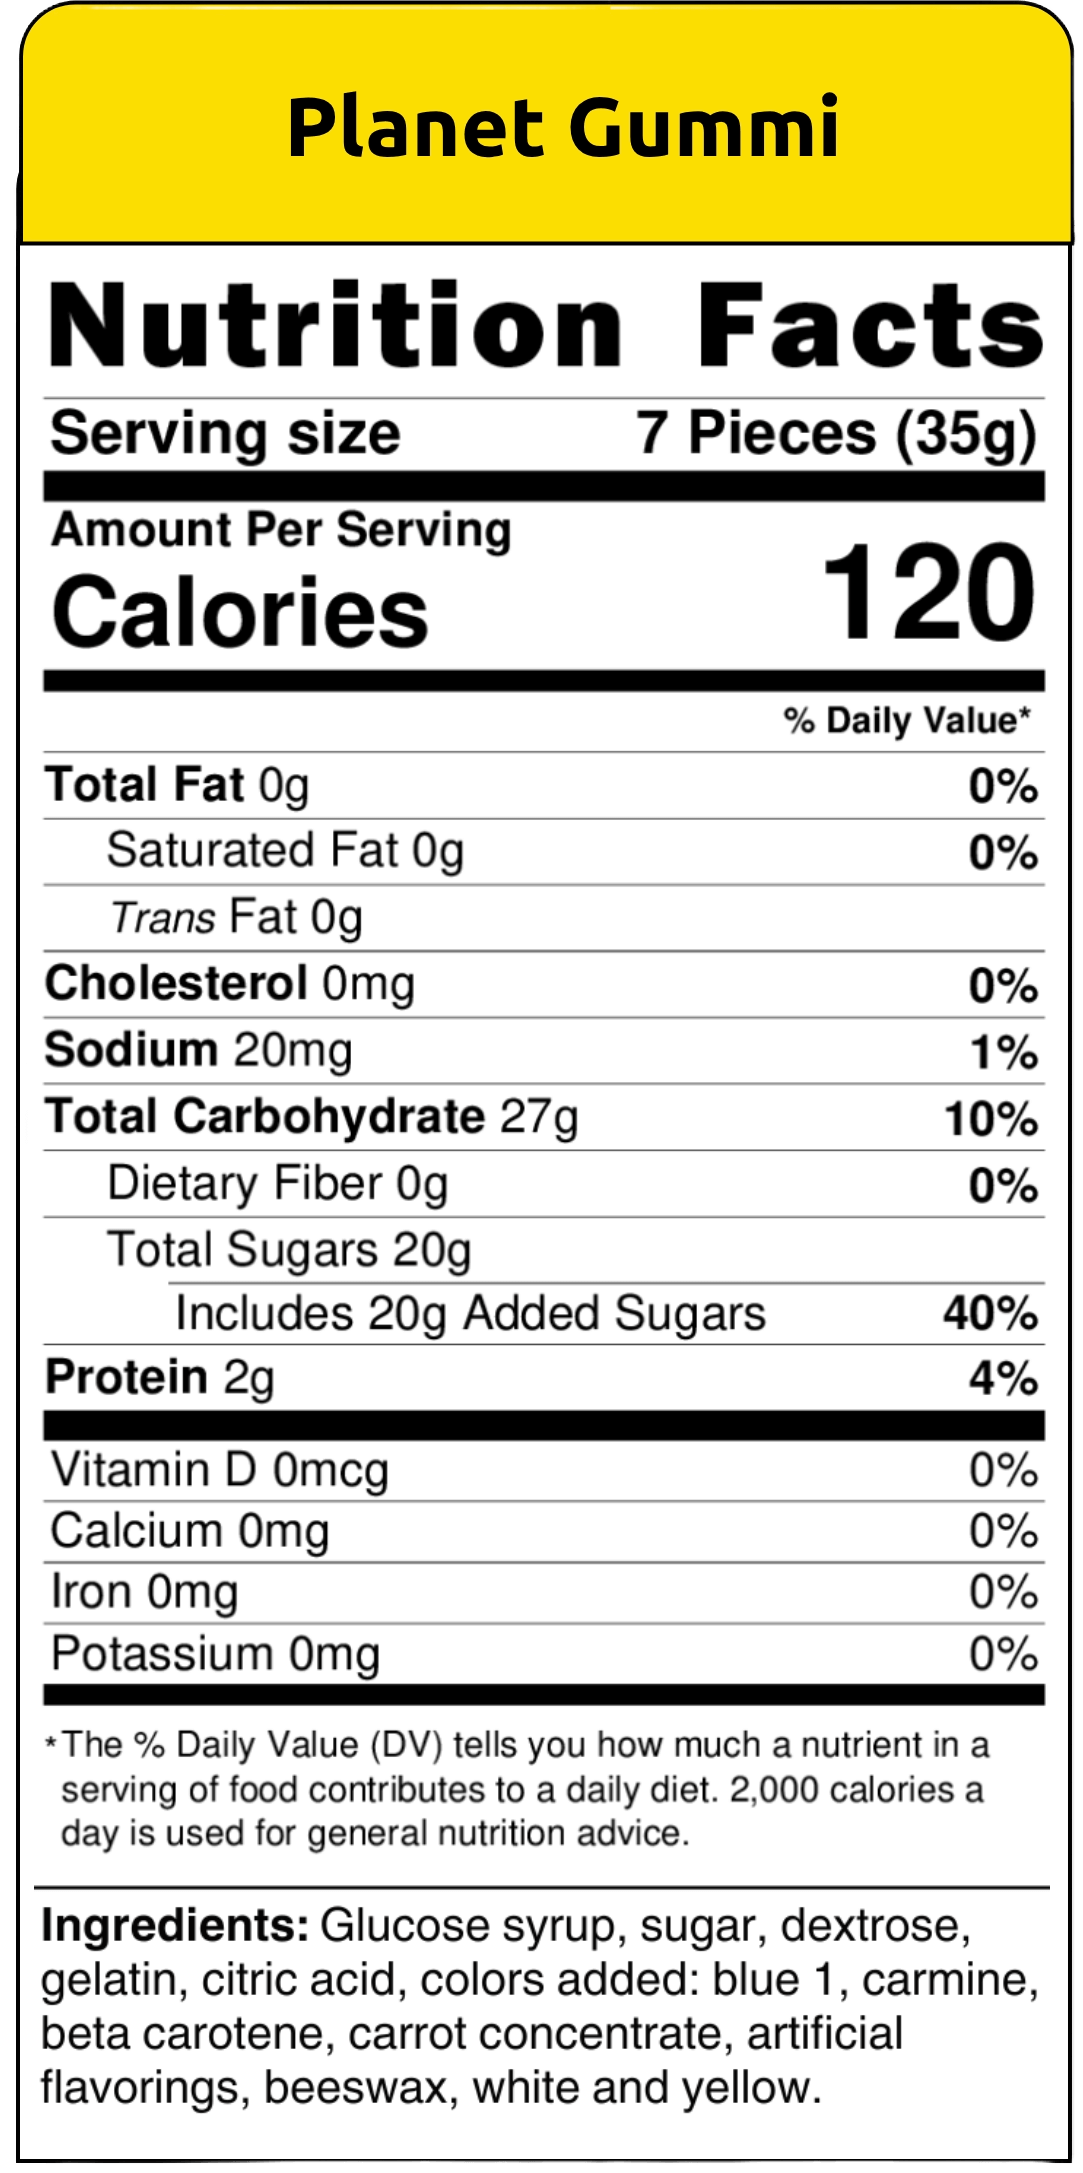 nutritional facts planet